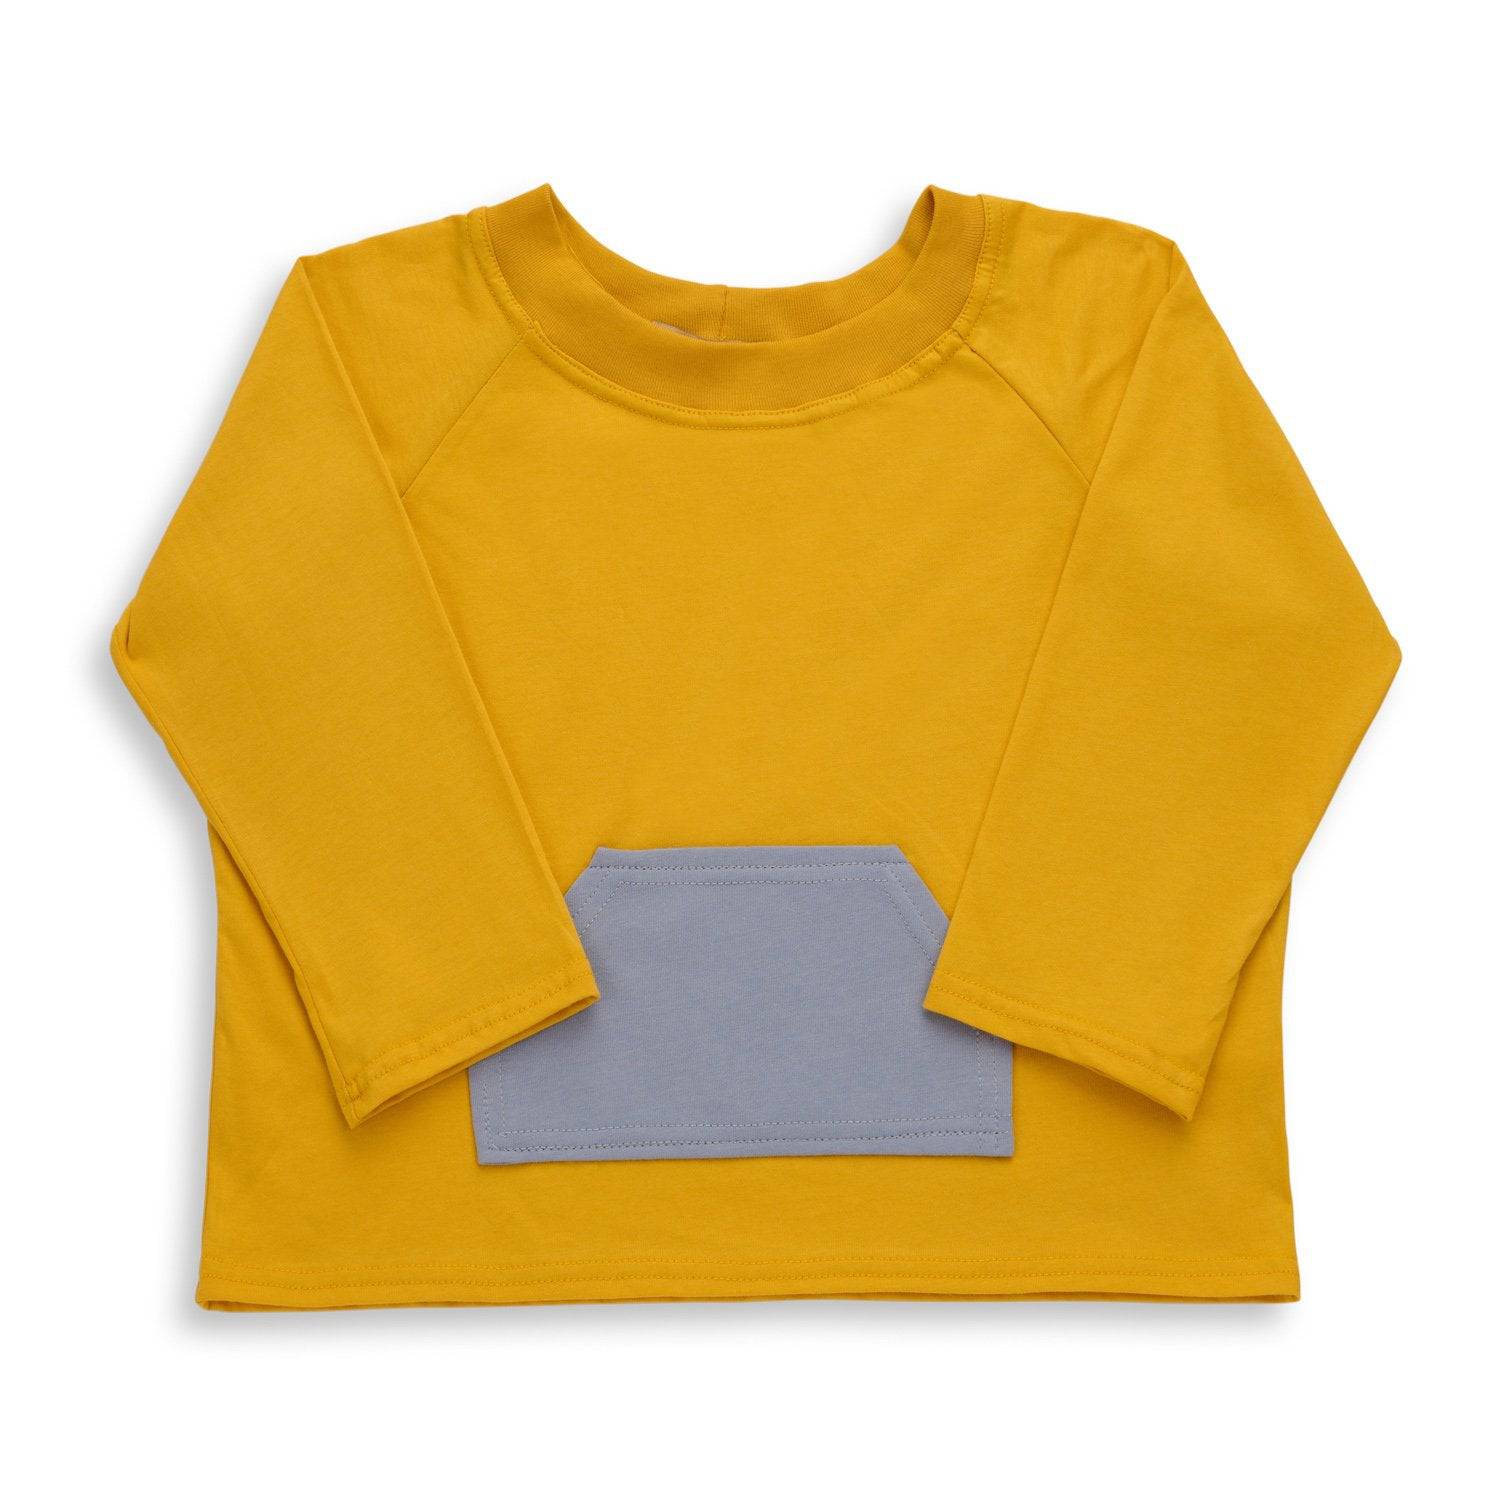 The Boat T-Shirts (boys - yellow) - CooCootales